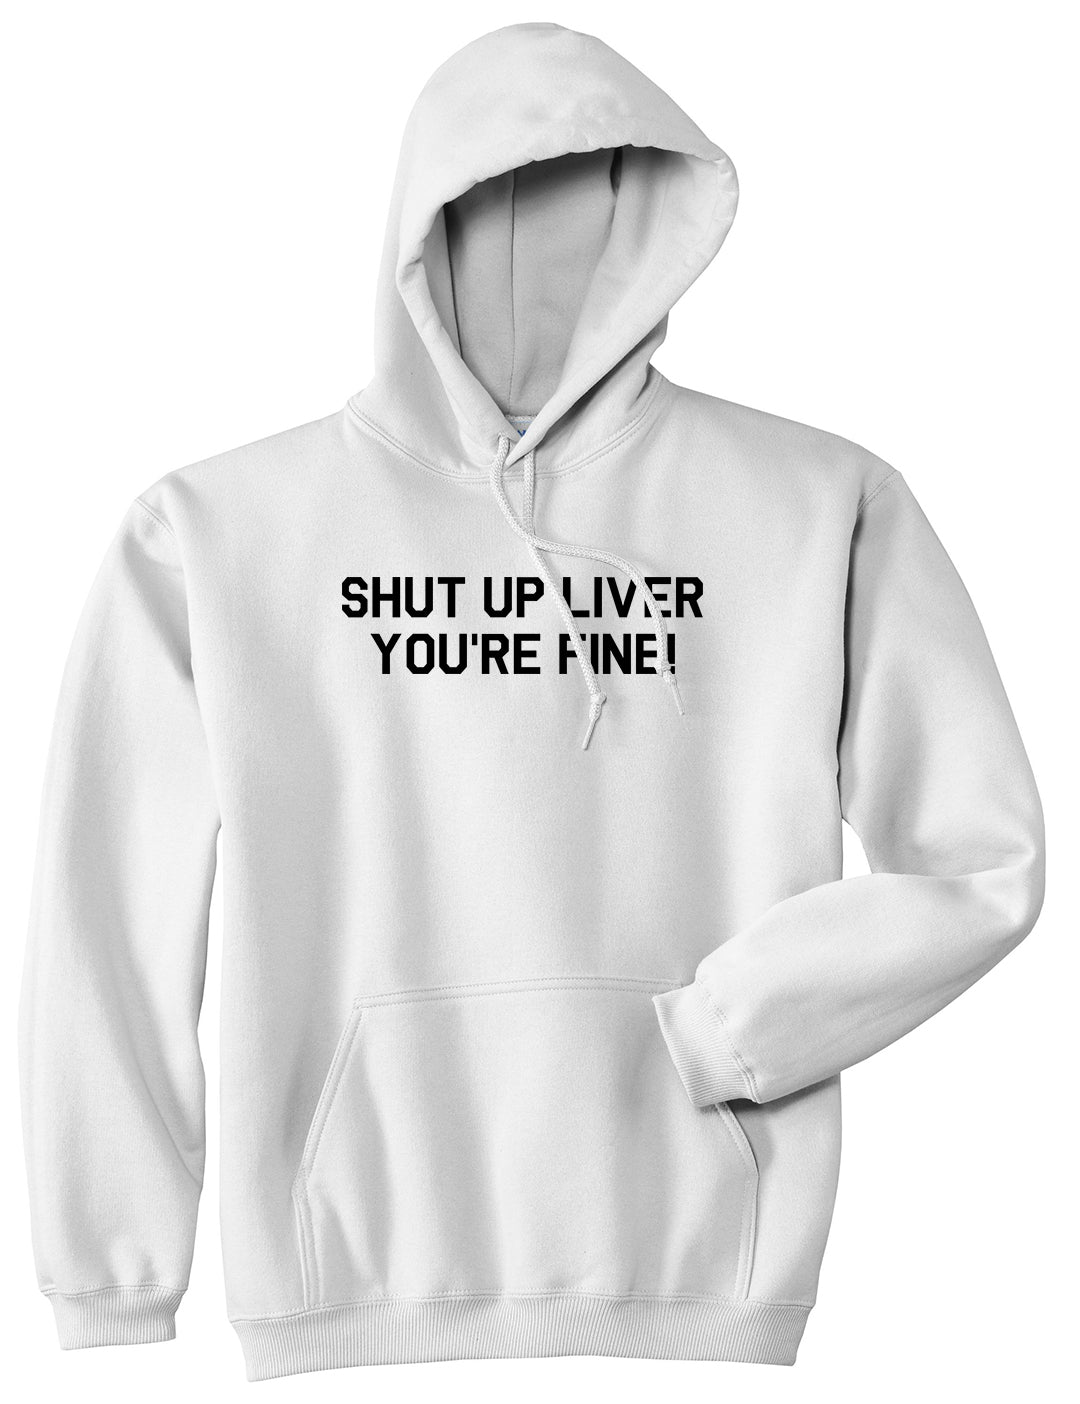 Shut Up Liver Youre Fine Mens Pullover Hoodie White